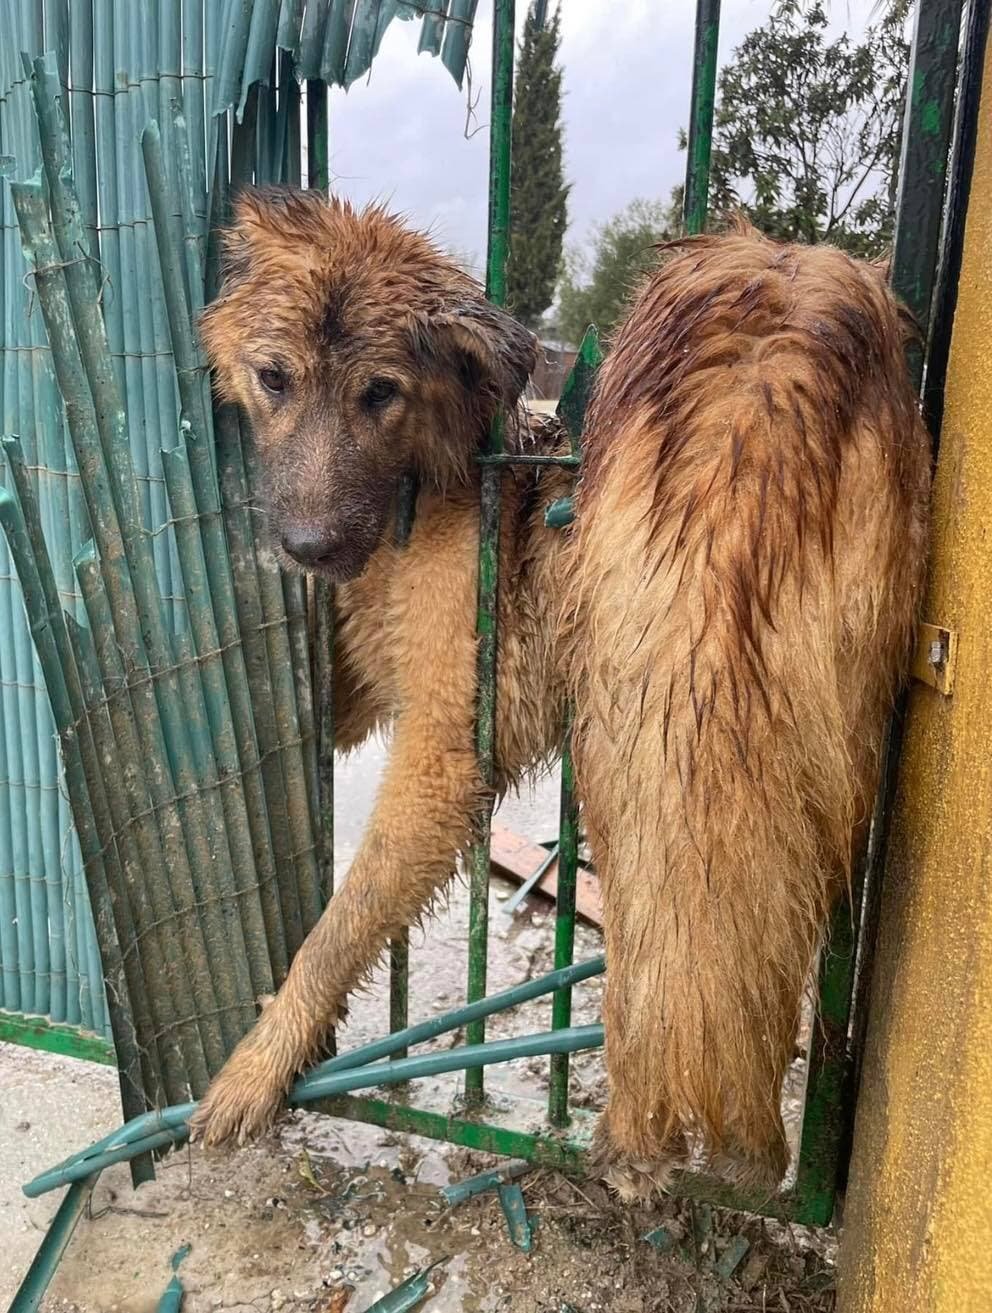 Heartbreaking Rescue Attempt: Man Bravely Fights to Save Neglected Dog in Marbella! - 325008300 565801068781775 7361636361314611793 n - Health and Safety -